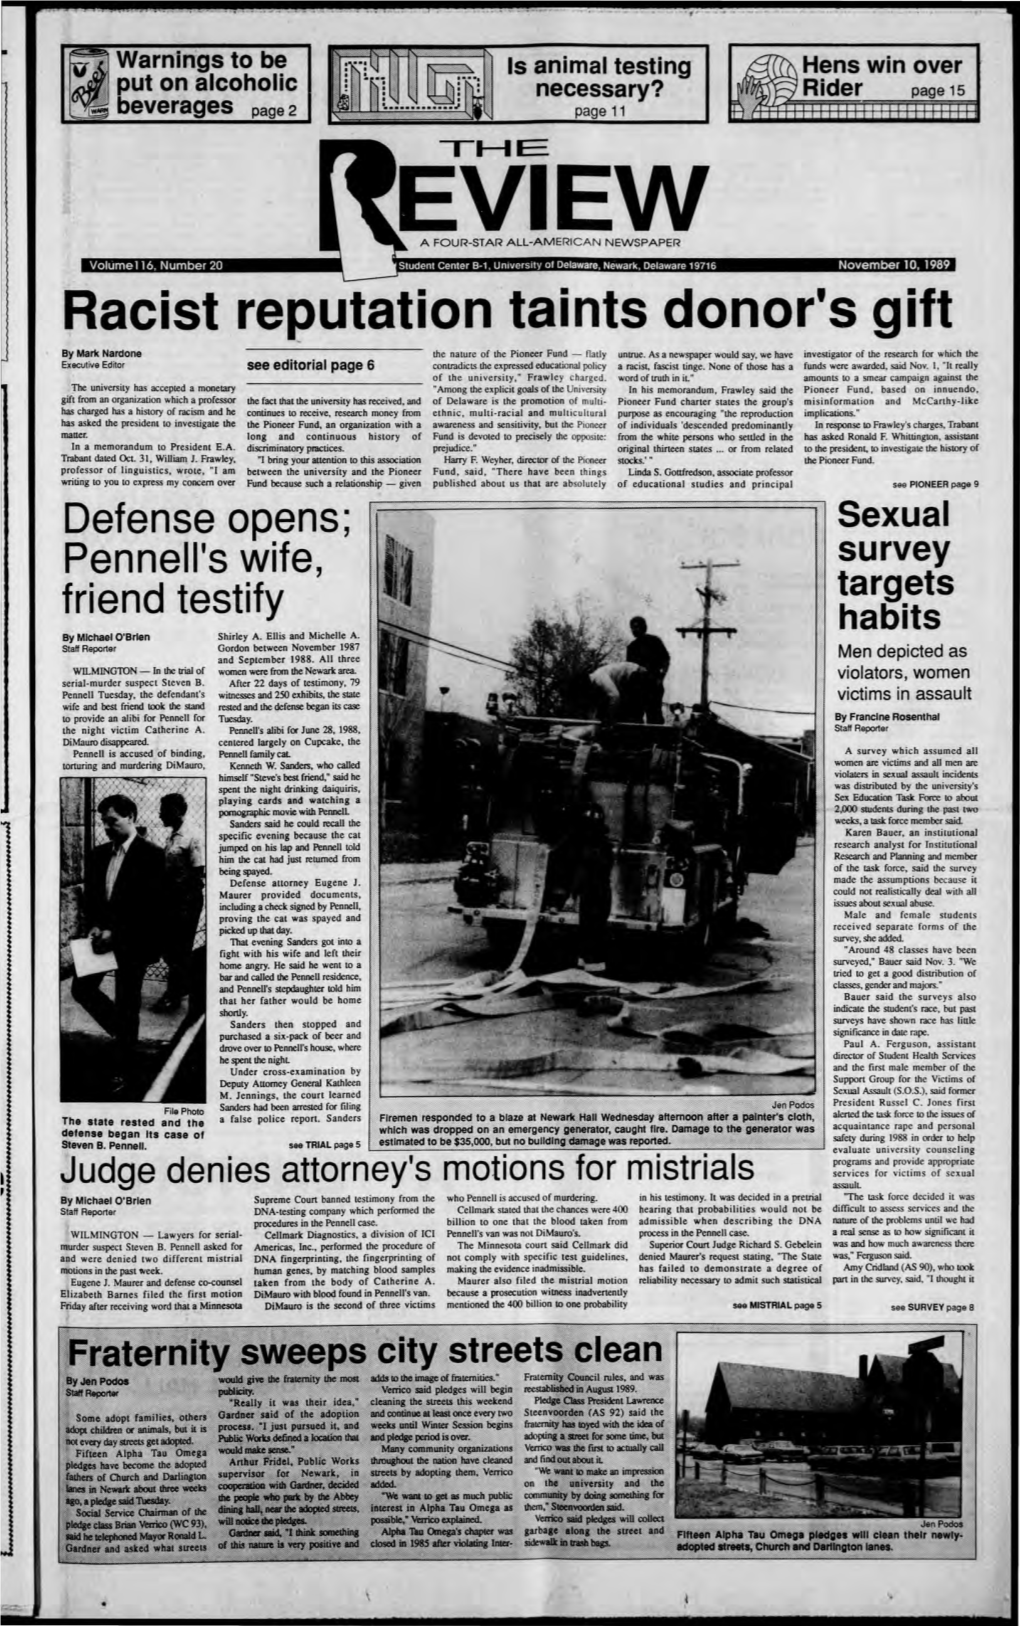 Racist Reputation ·Taints Donor's Gift